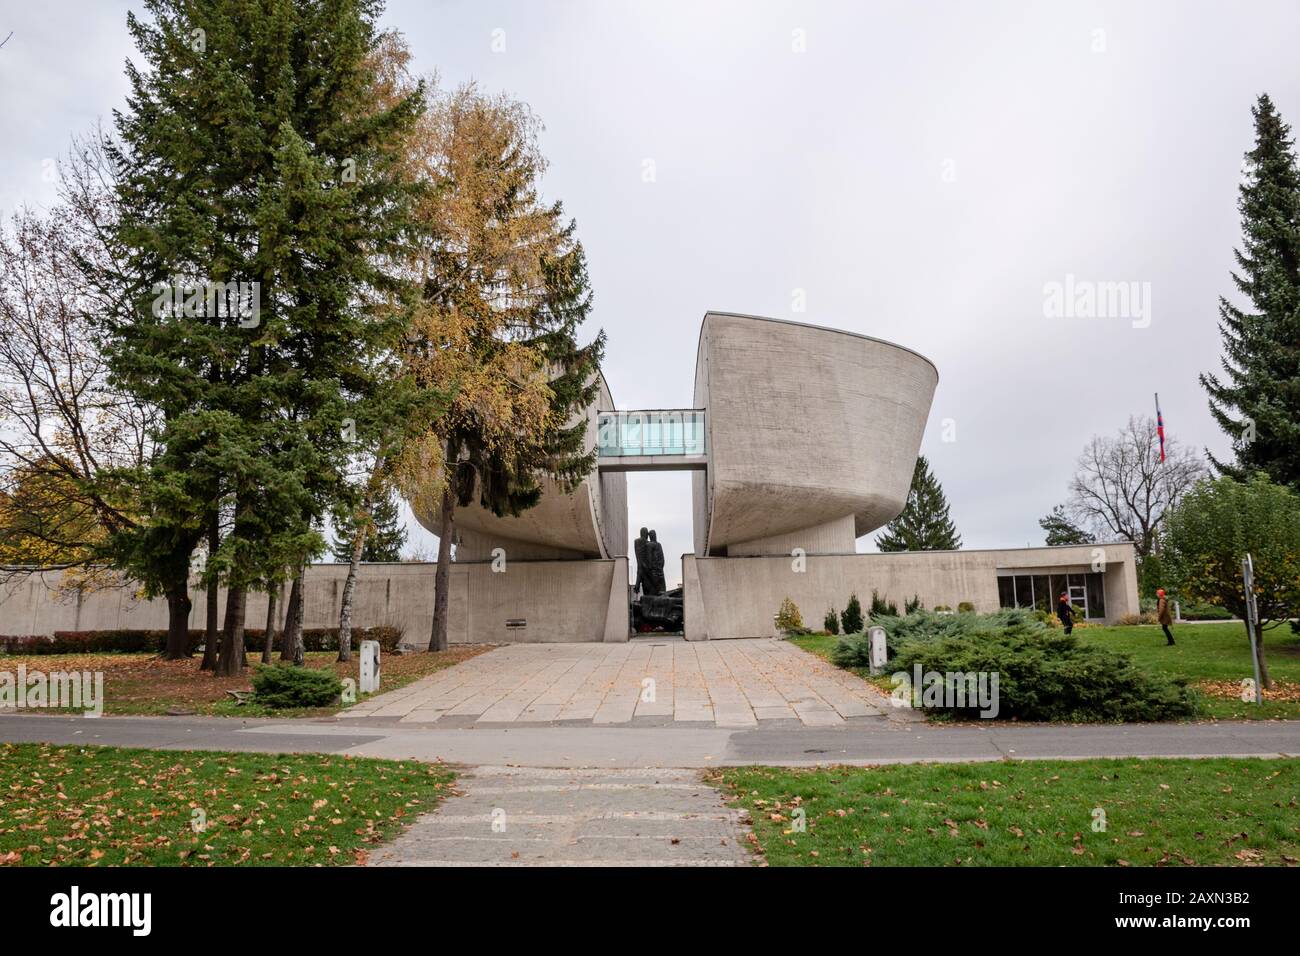 Banska Bystrica, Slovakia - October 29, 2019: Museum Of the Slovak National Uprising. Concrete structure divided in two sections. Tourist attraction. Stock Photo